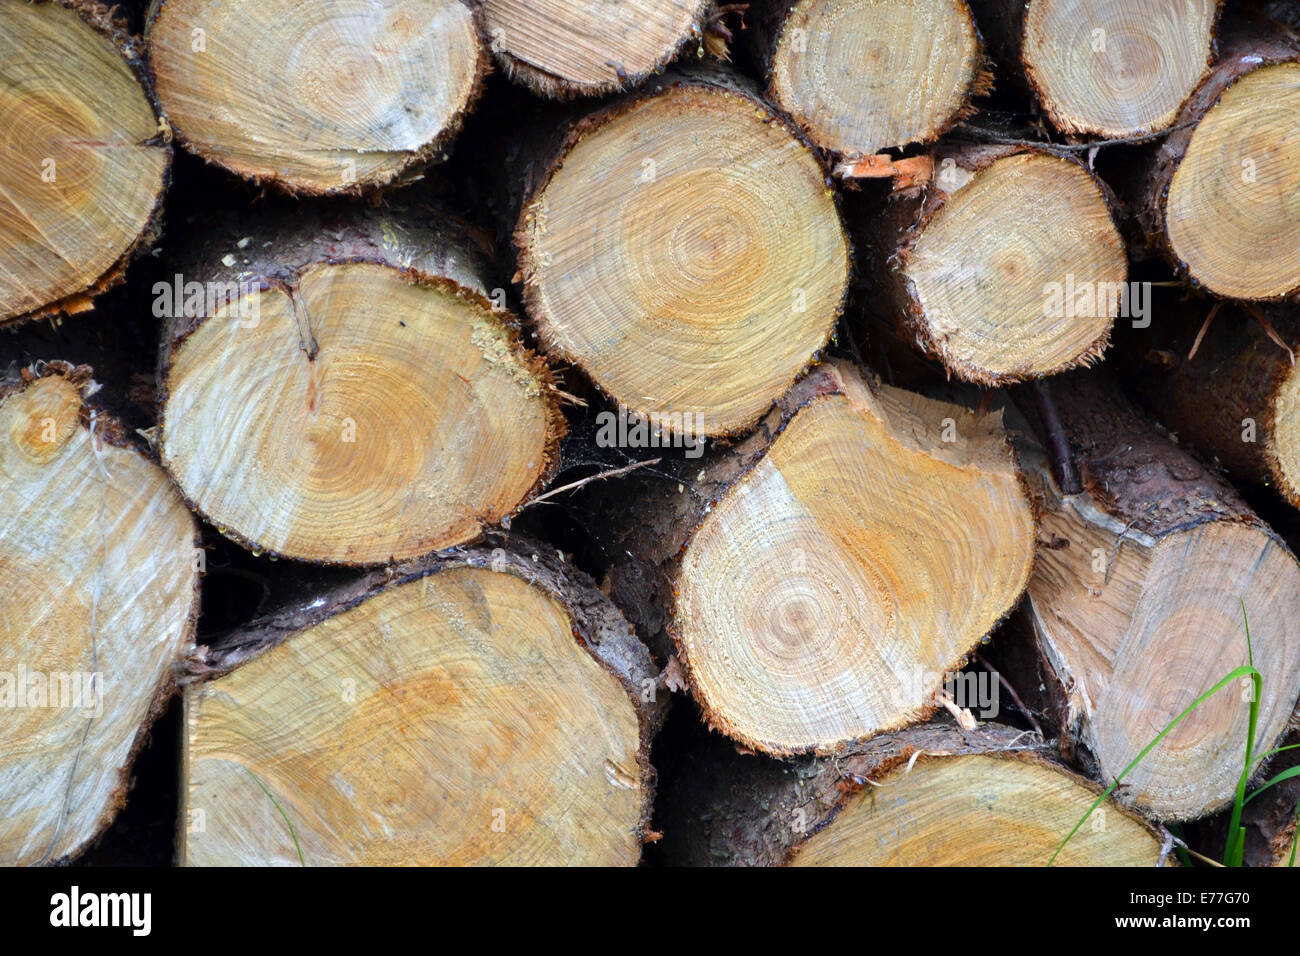 close up of some cut up timber logs Stock Photo